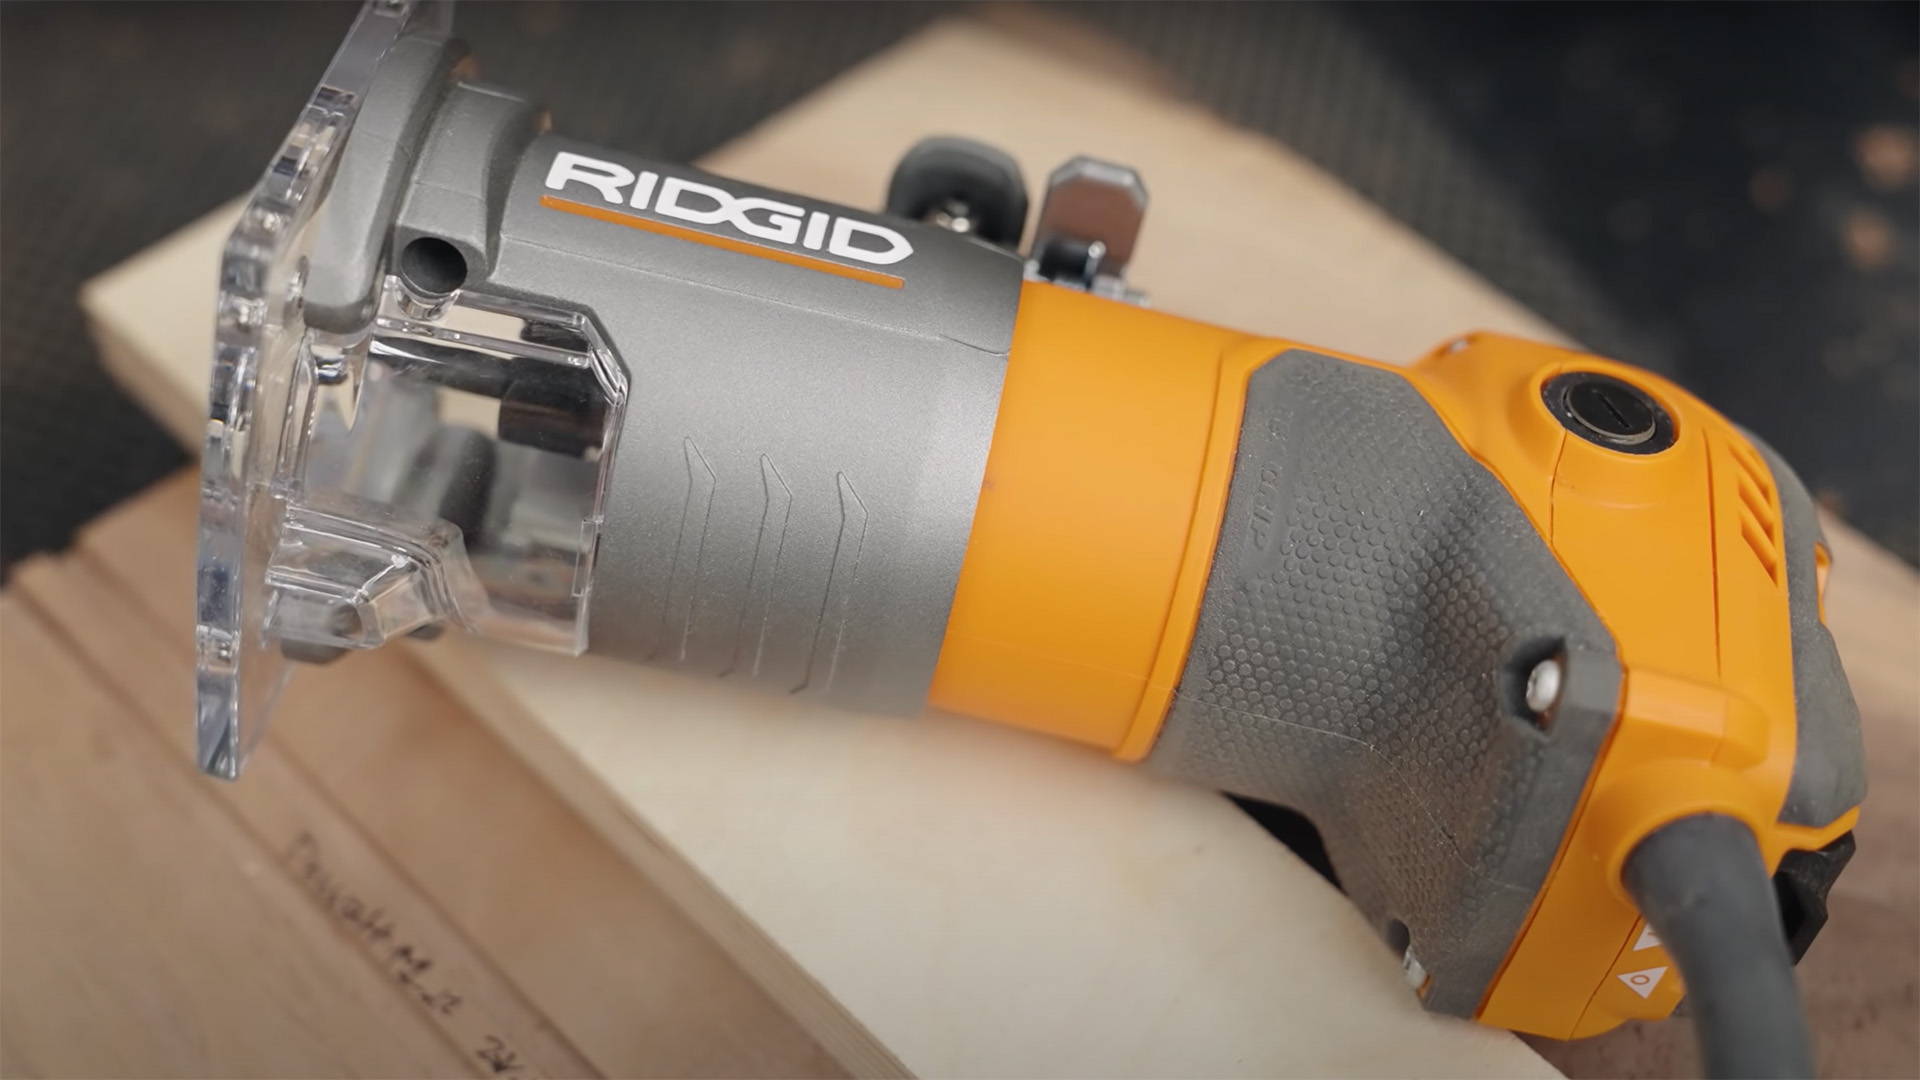 Ridgid compact router